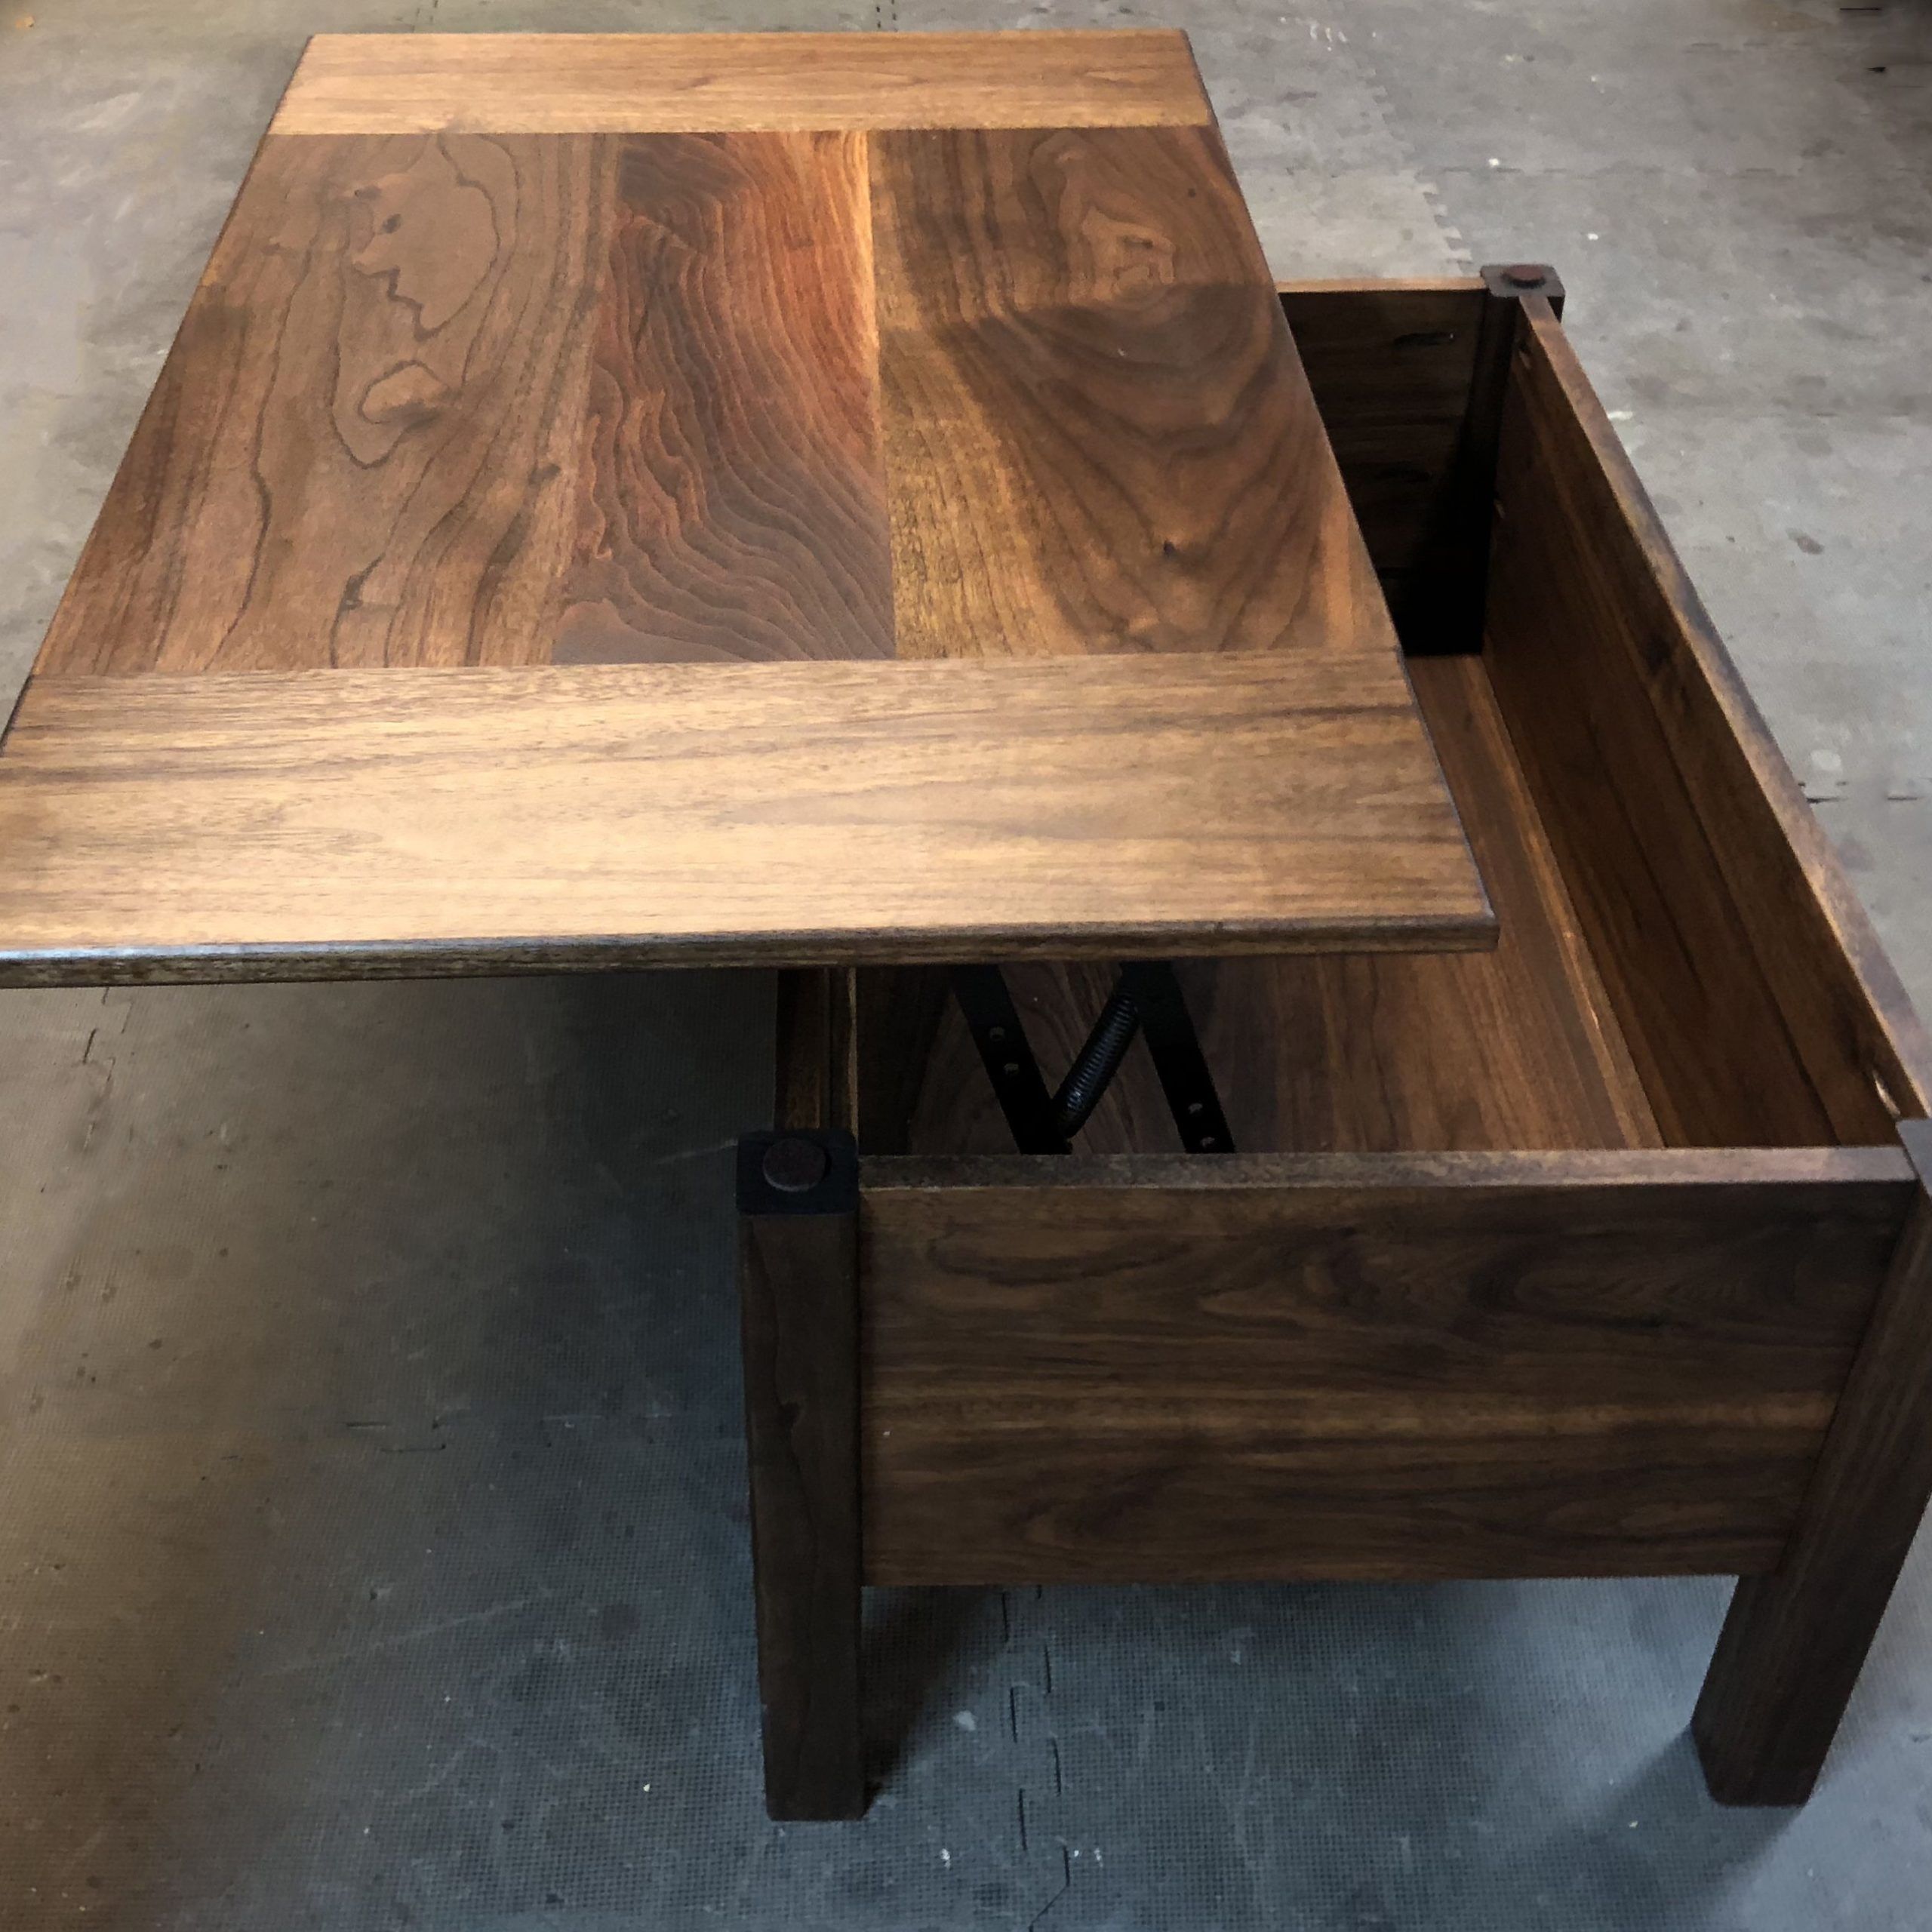 Buy Hand Made Lift Top Combination Storage Coffee Table And Desk Made From  Solid Hardwood Or Pine, Made To Order From Mr² Woodworking | Custommade Inside Modern Wooden Lift Top Tables (View 7 of 15)